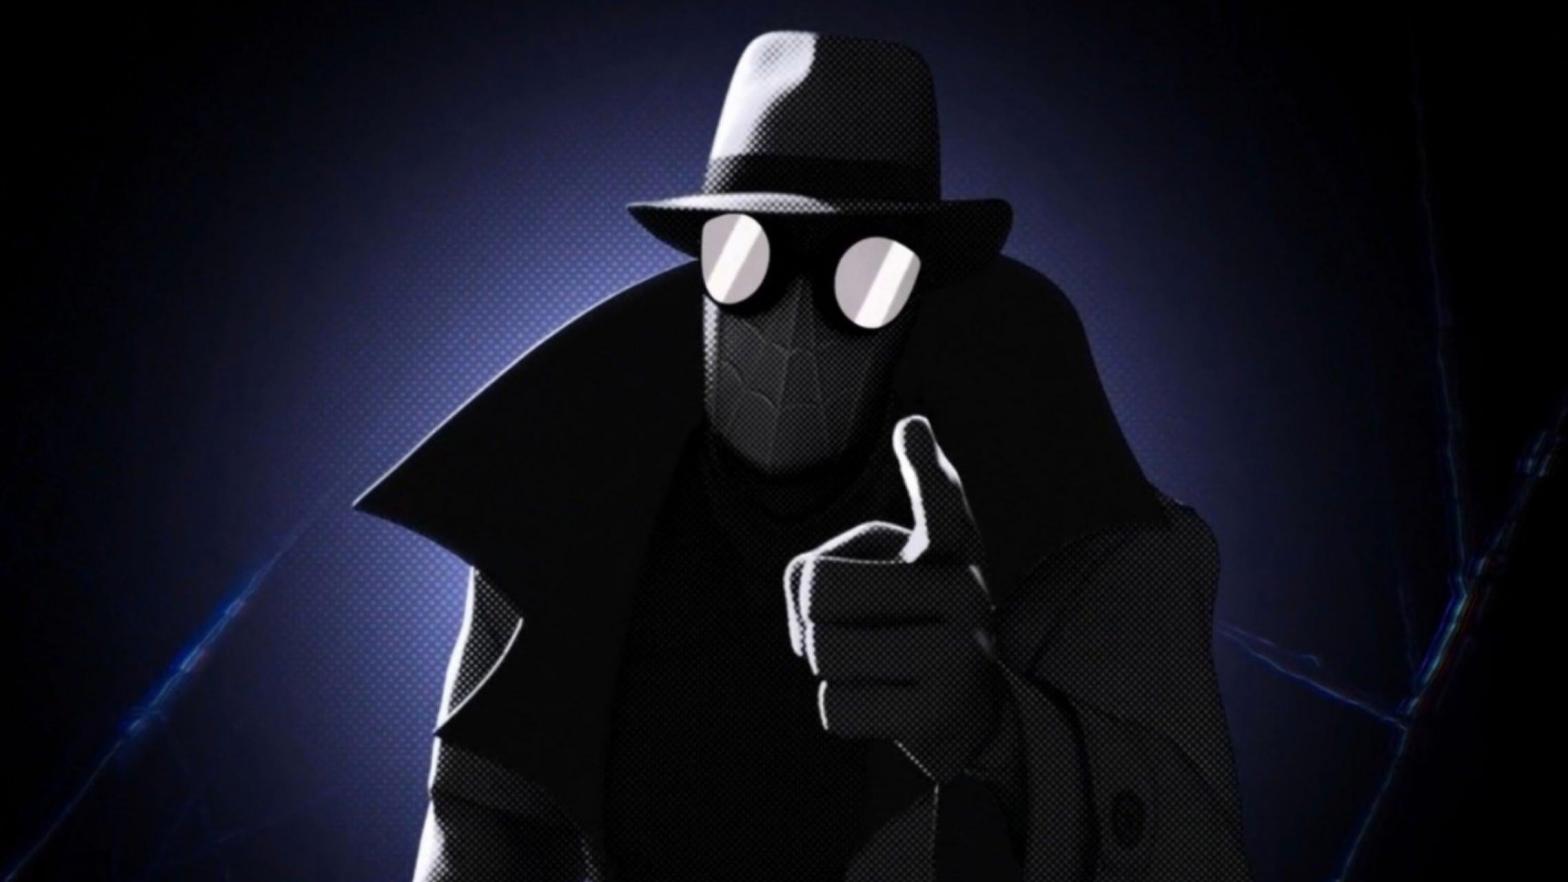 Spider-Man Noir is making his jump to live action. (Image: Sony)